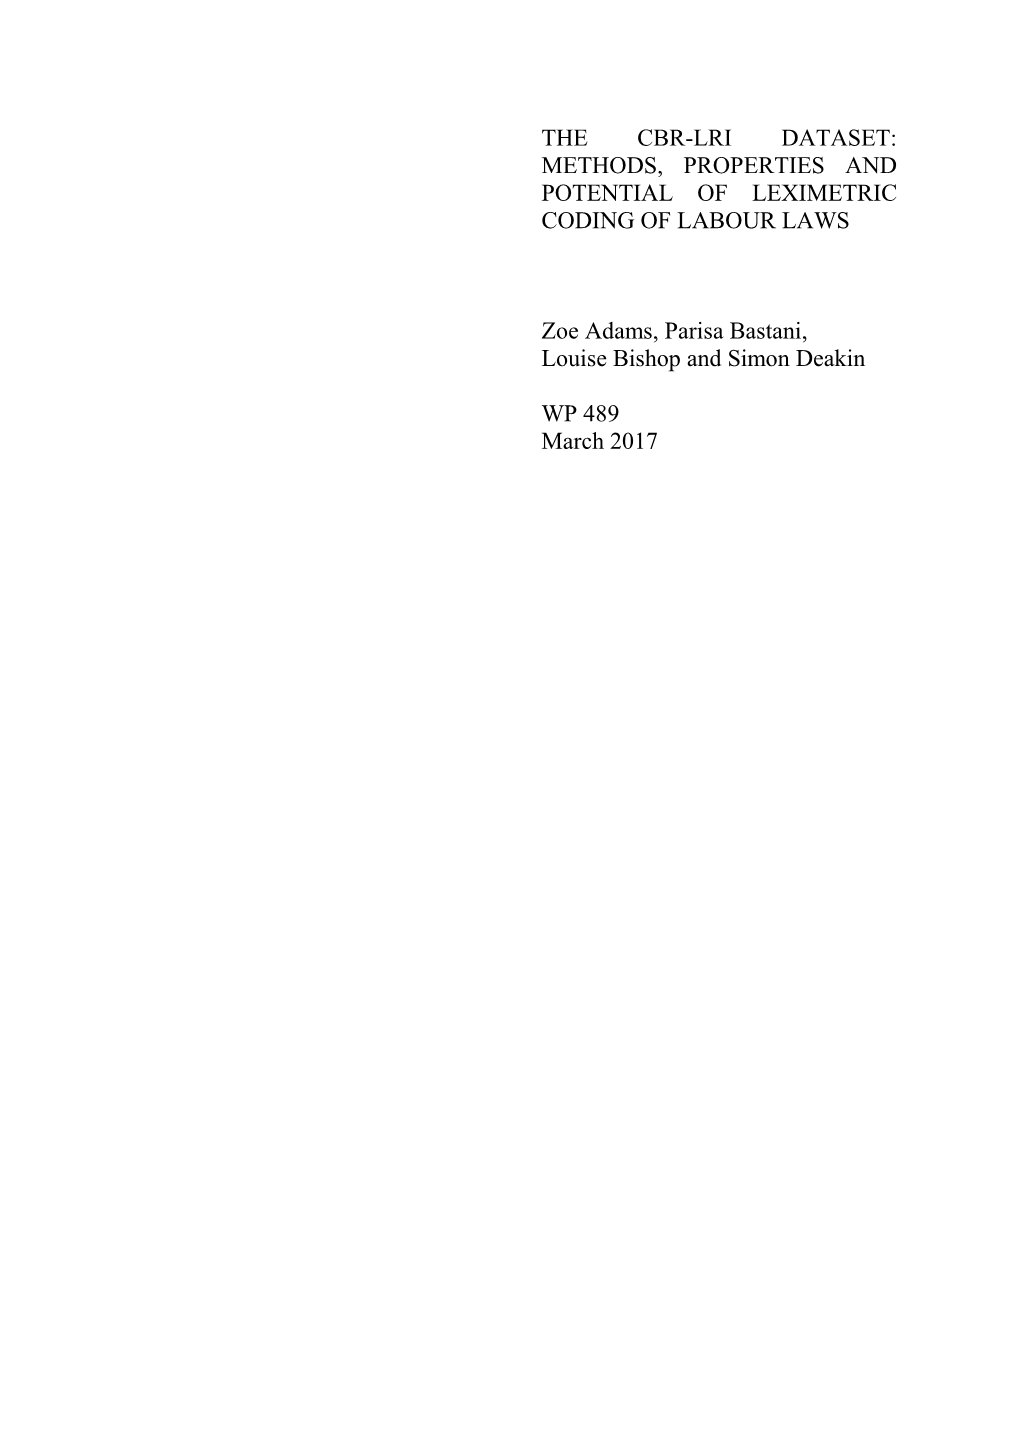 Methods, Properties and Potential of Leximetric Coding of Labour Laws